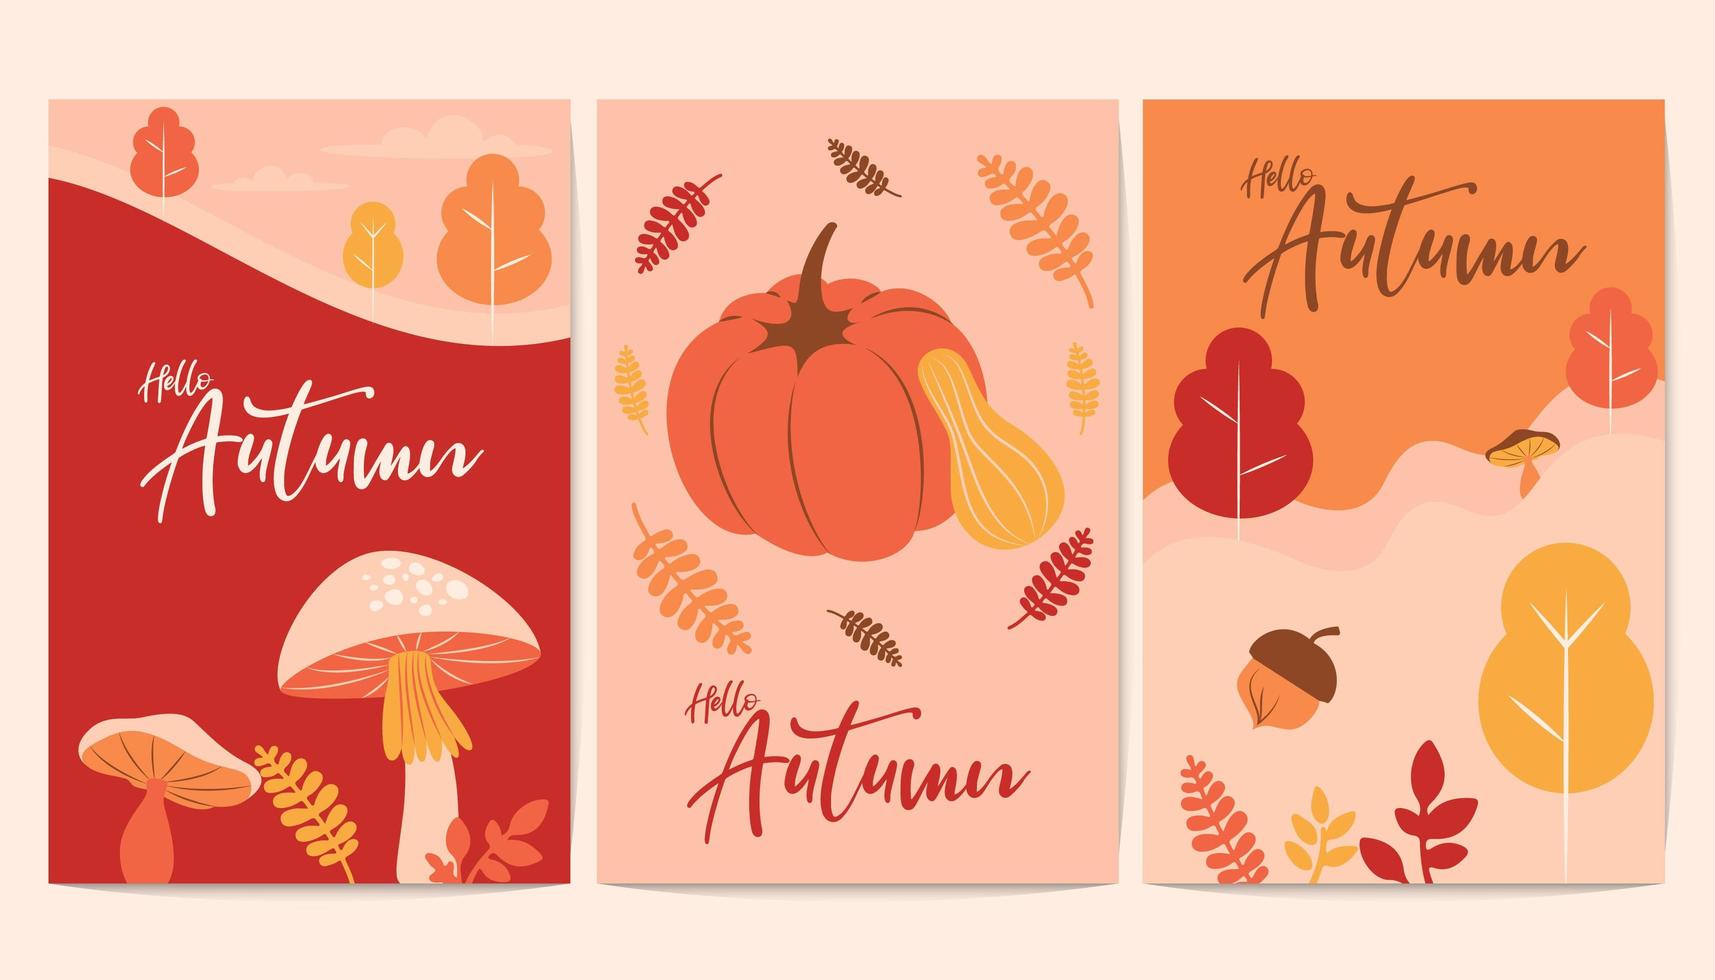 Rustic hello autumn banners with fall nature elements vector